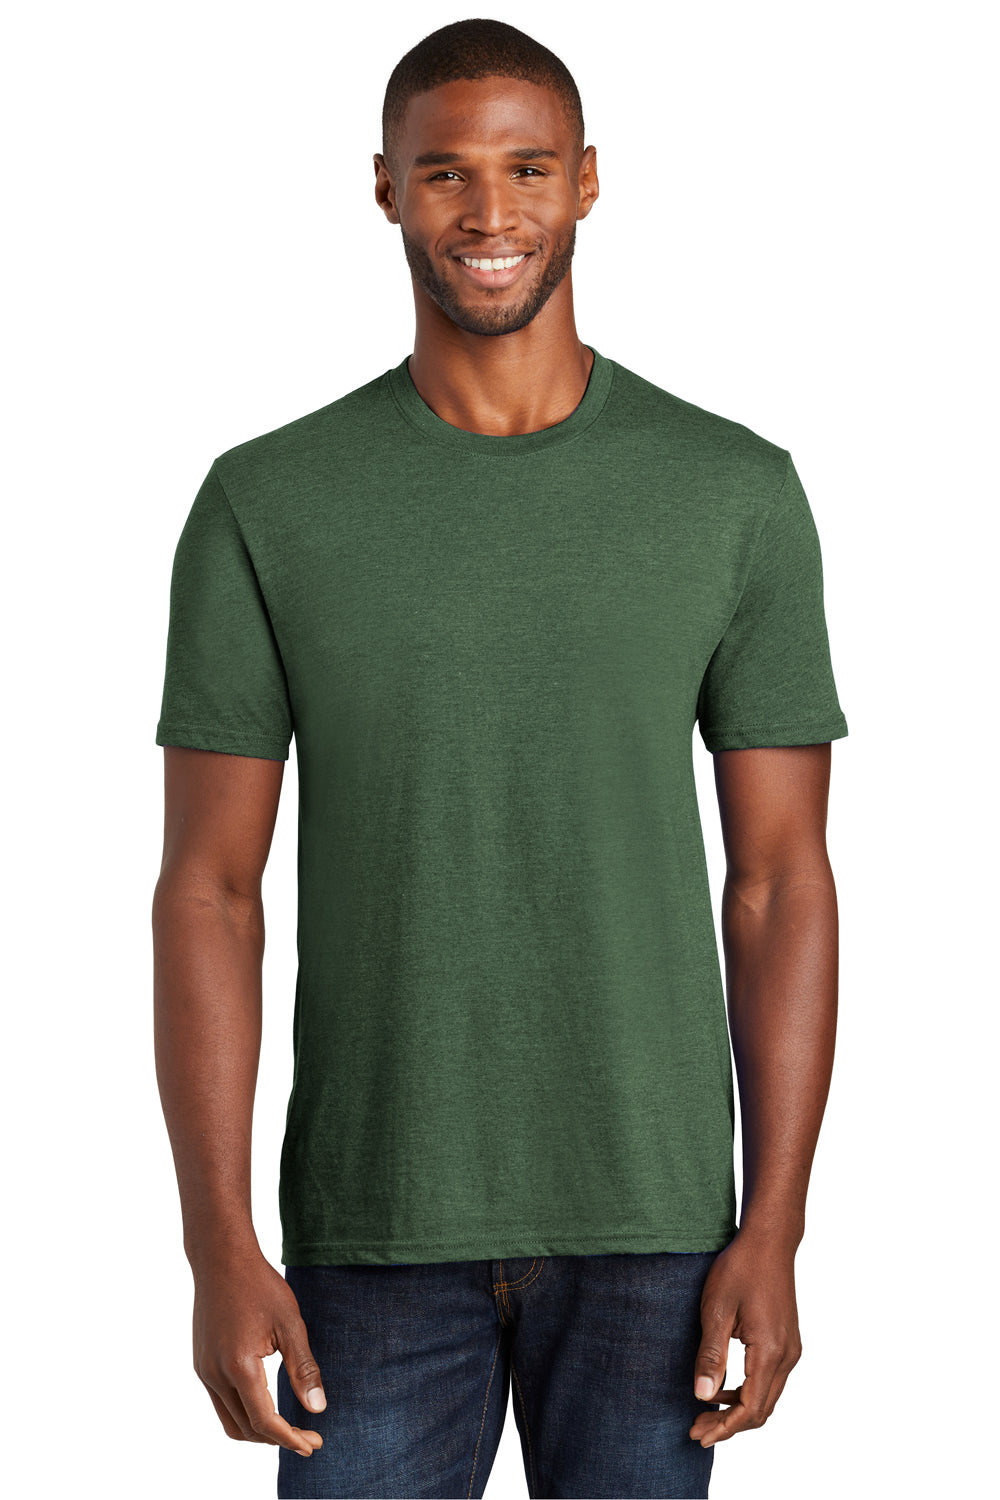 Port & Company PC455 Mens Fan Favorite Short Sleeve Crewneck T-Shirt Heather Forest Green Front